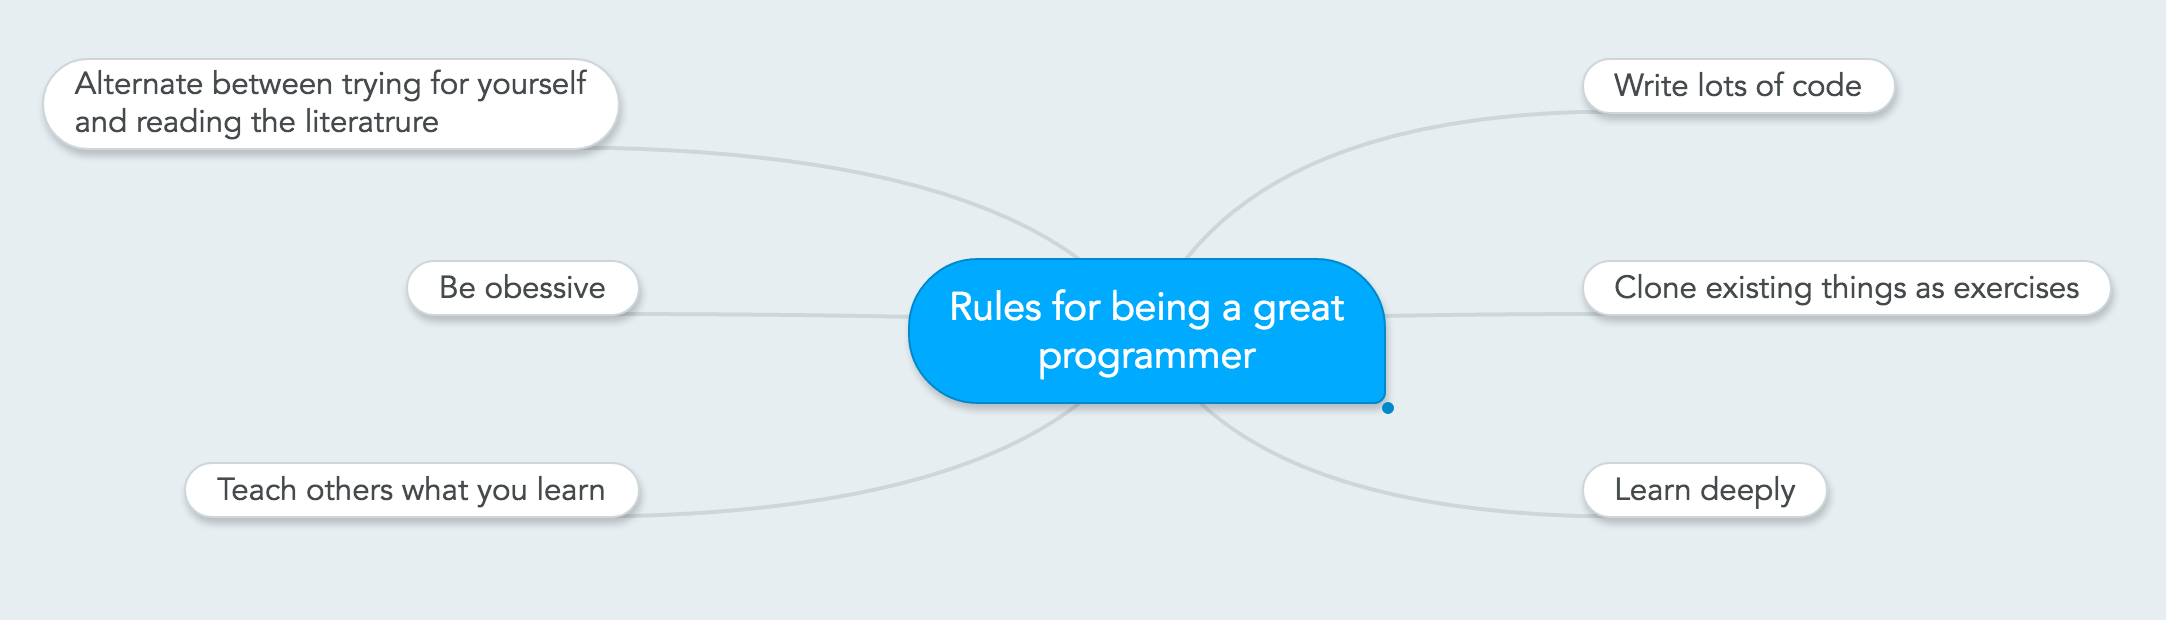 Mindmap of the rules